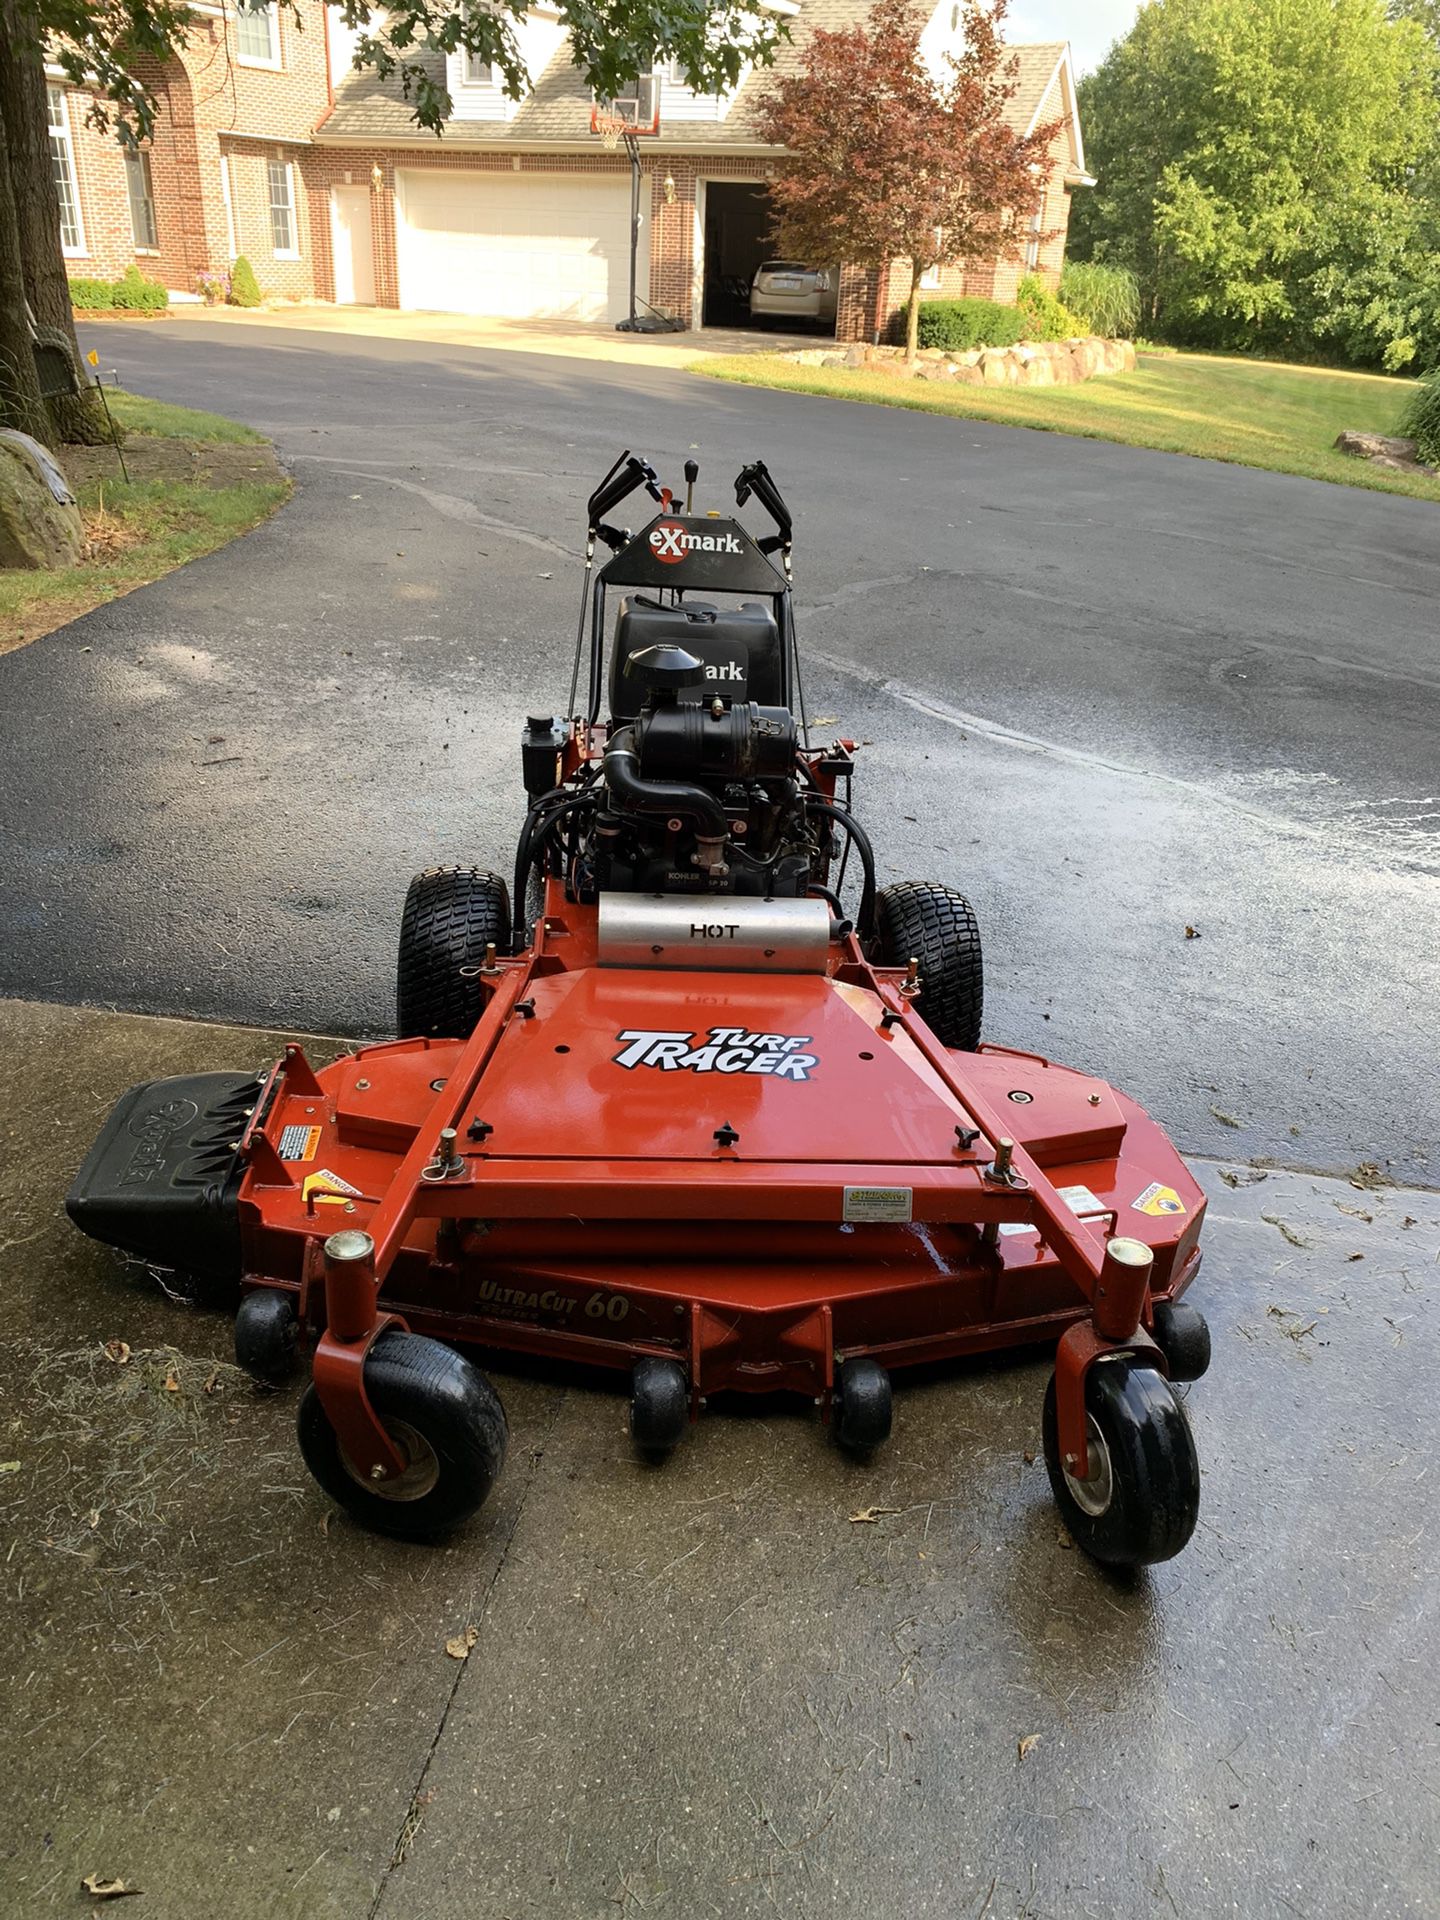 X Mark Turf Tracer. Never used commercially. 110 hours on the clock. Mulching blades, grass bag, and manual included.